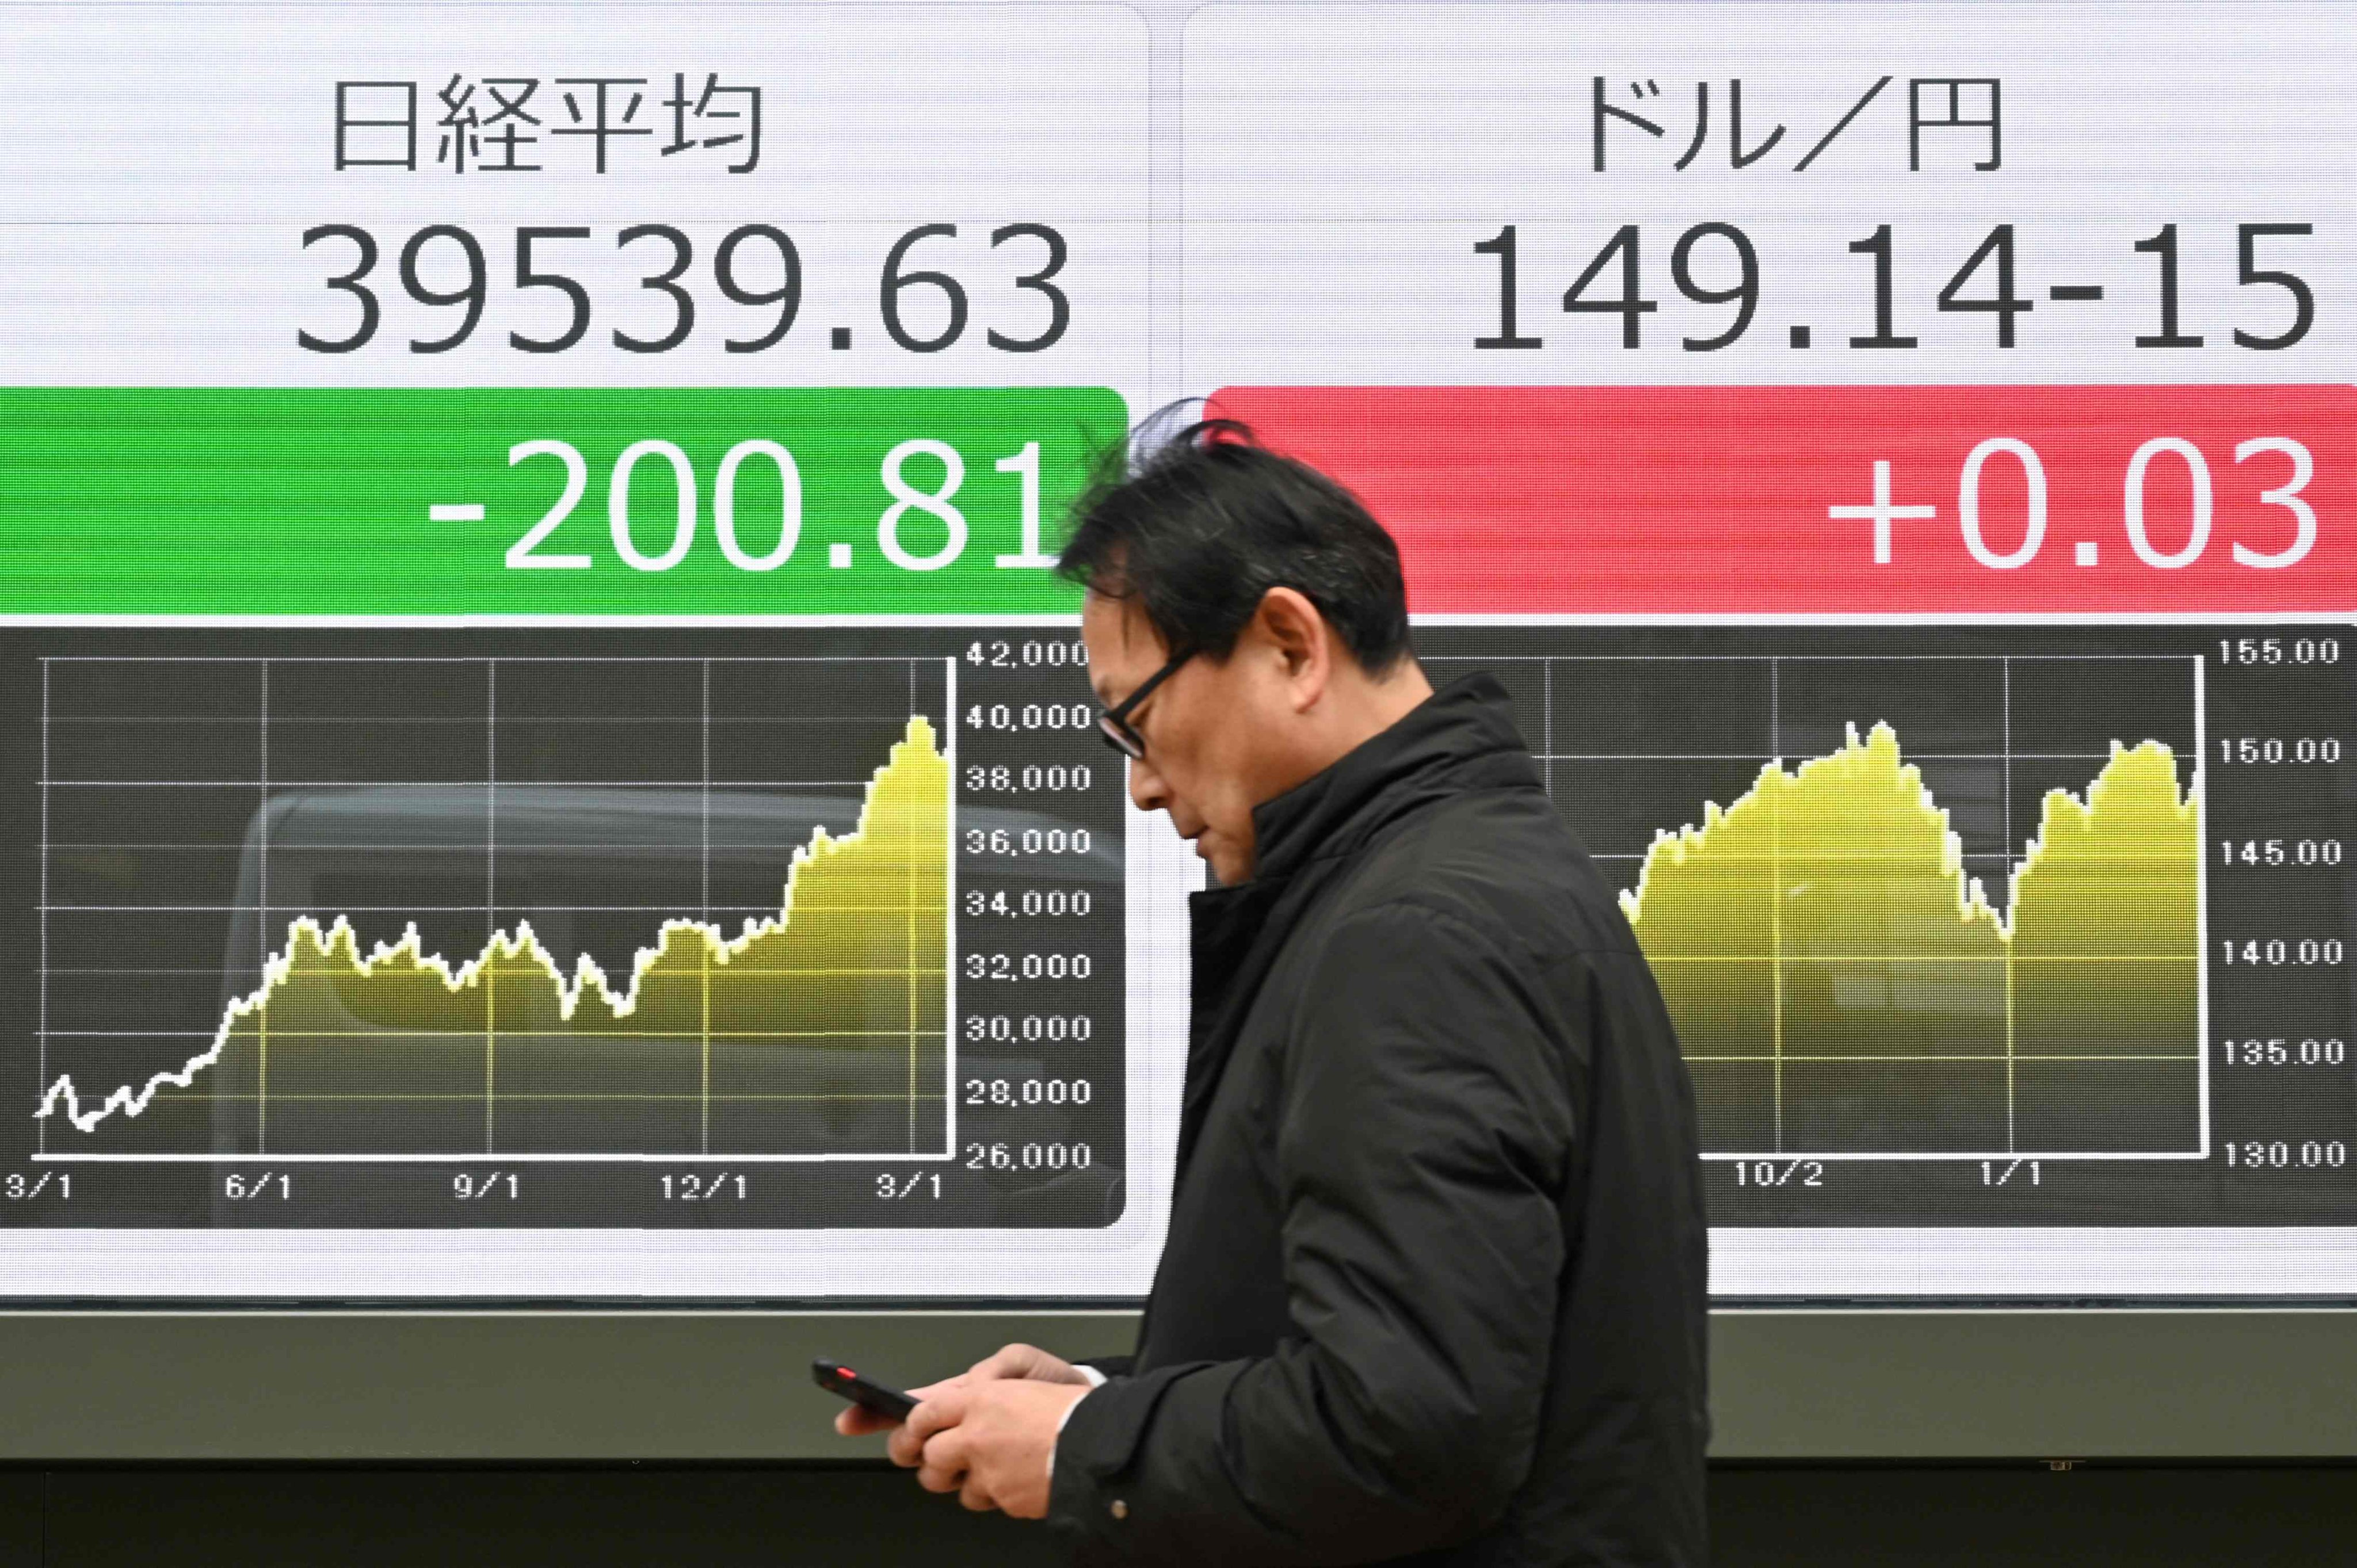 A man walks past an electronic board showing share prices on the Tokyo Stock Exchange and the rate of the Japanese yen versus the US dollar, on a street in Tokyo on March 19. Photo: AFP